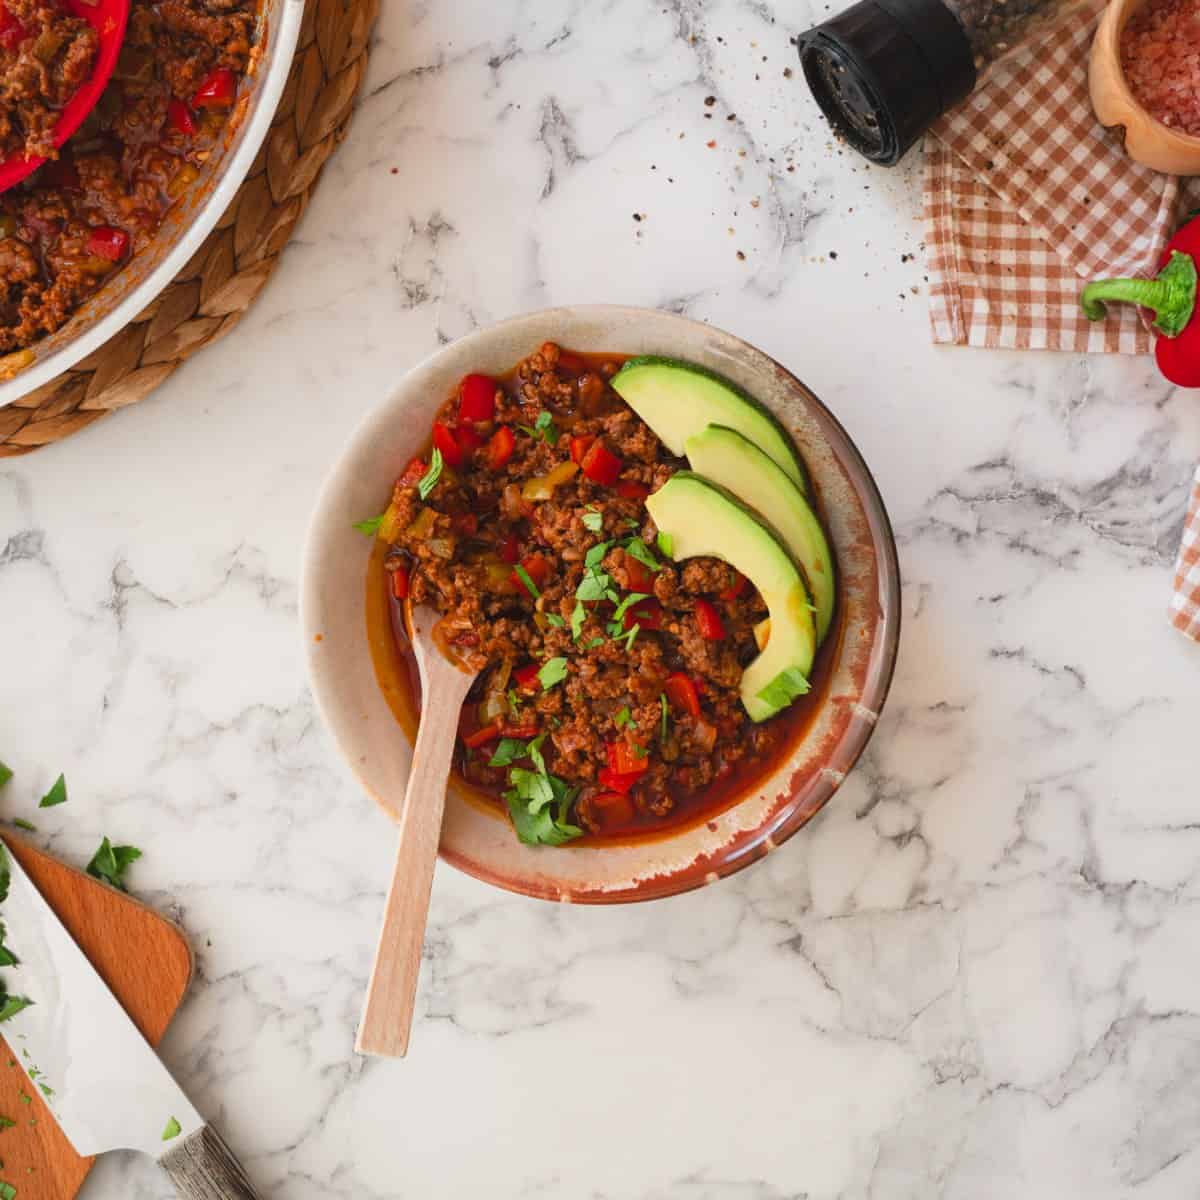 Keto chili con carne served with avocado slices in a bowl with a spoon.